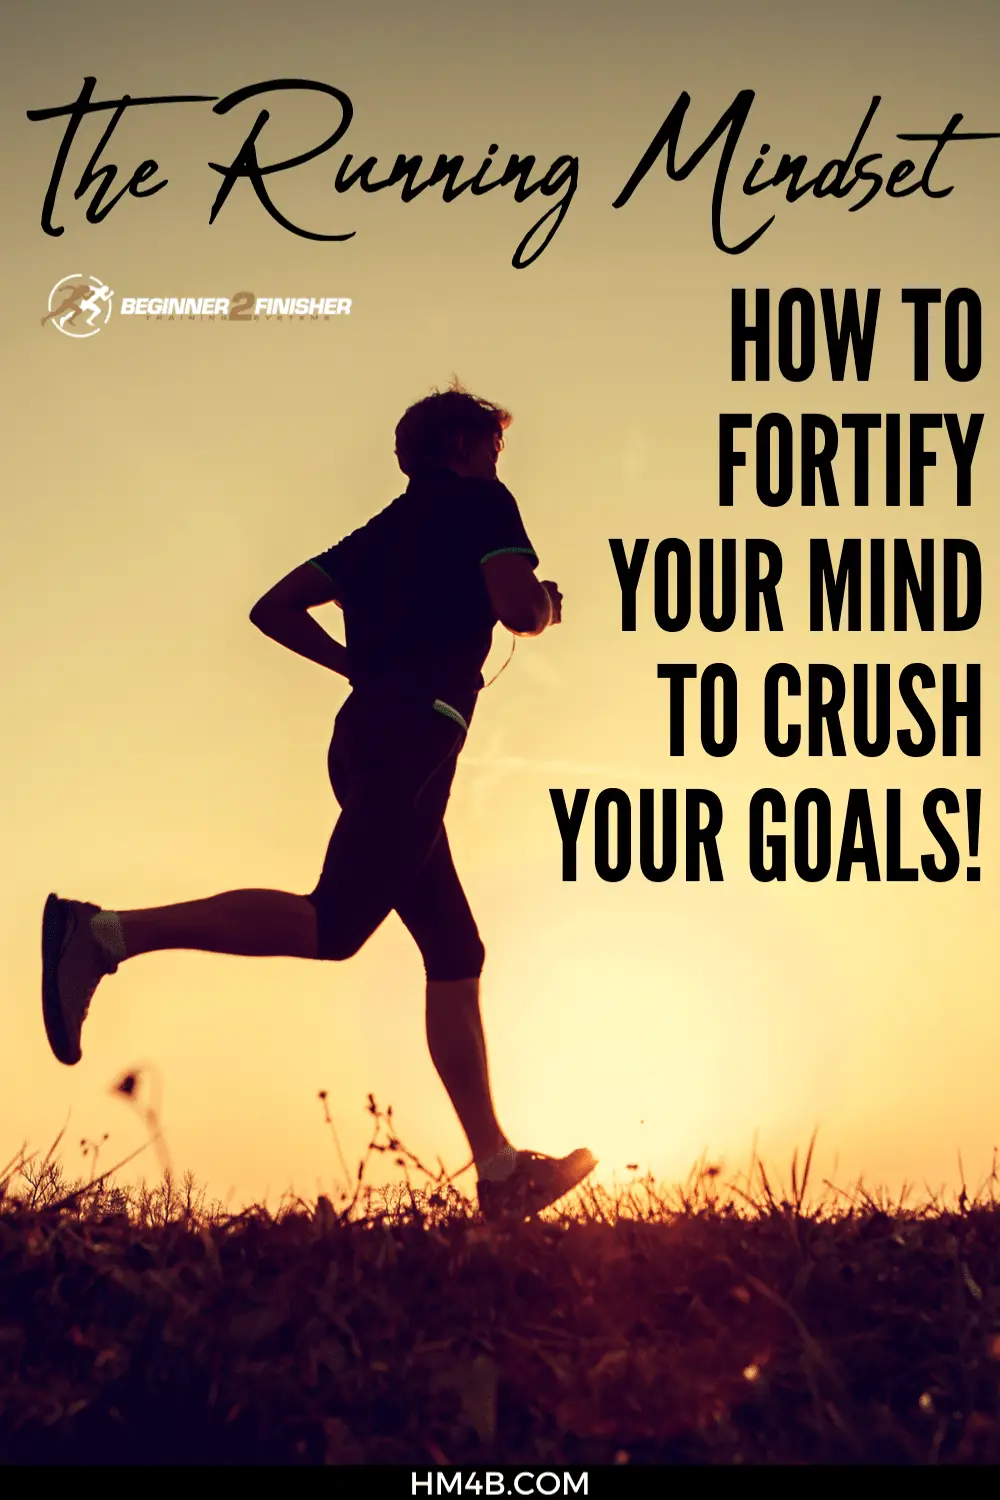 The Running Mindset - How to fortify your mind to crush your goals!